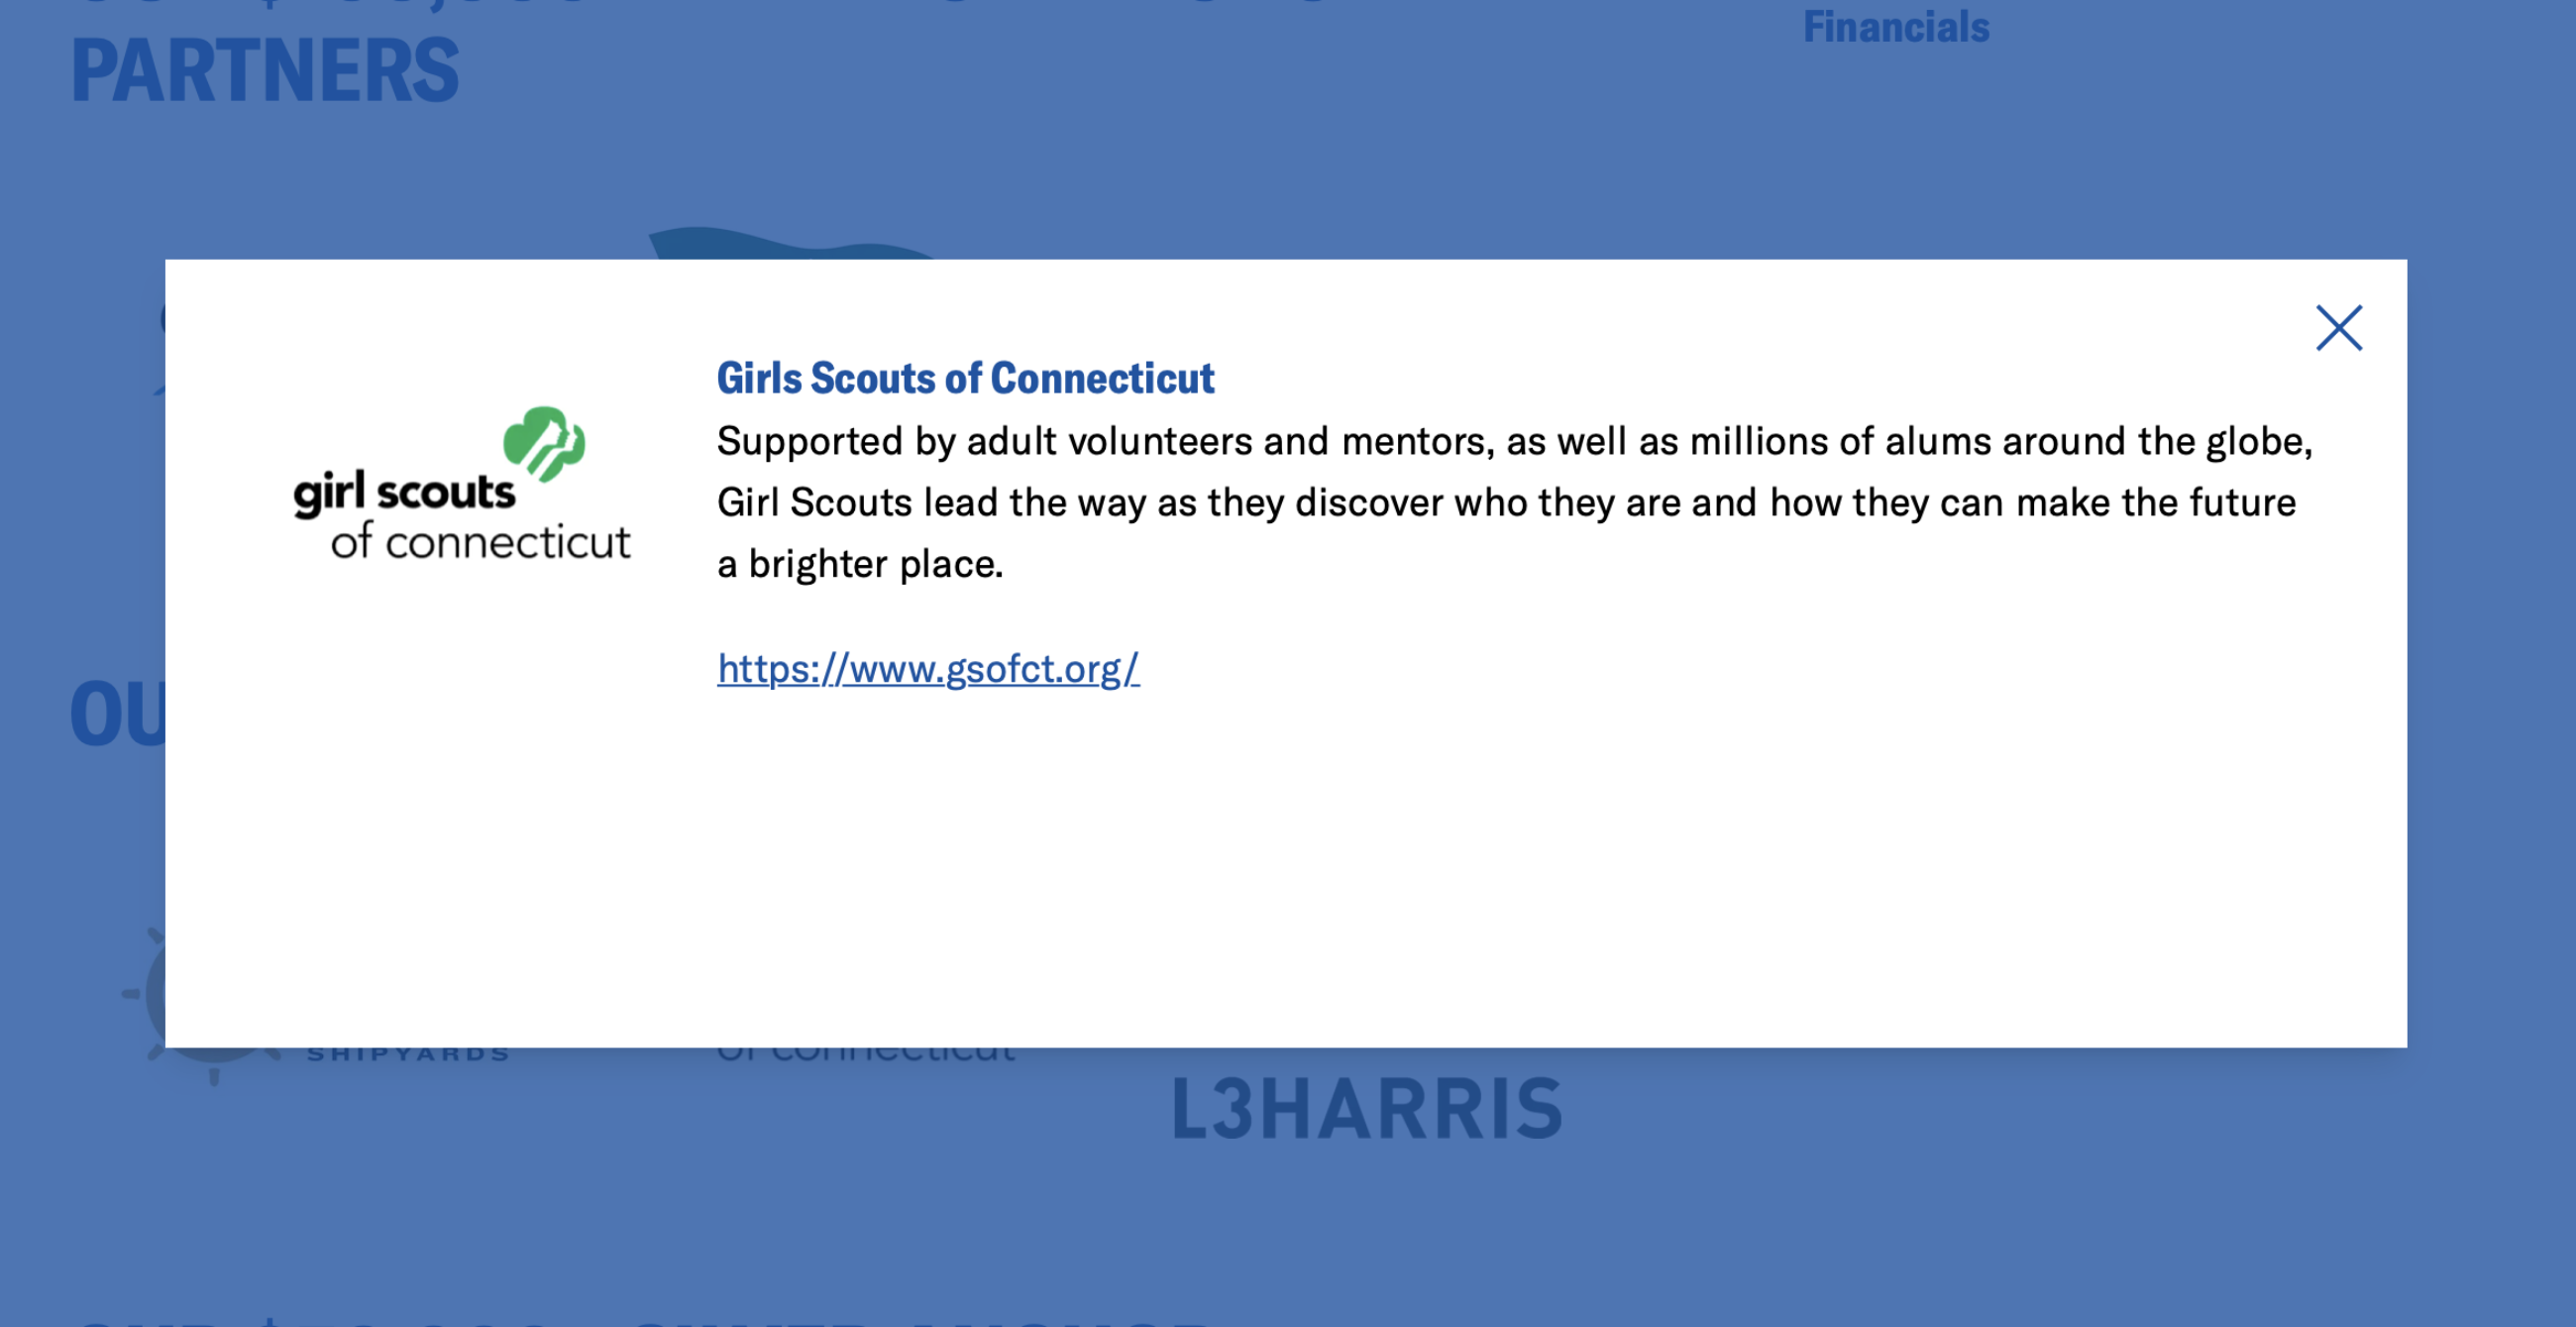 Modal for Girl Scouts of Connecticut and text about their support of the Coast Guard Foundation and a link to their website.